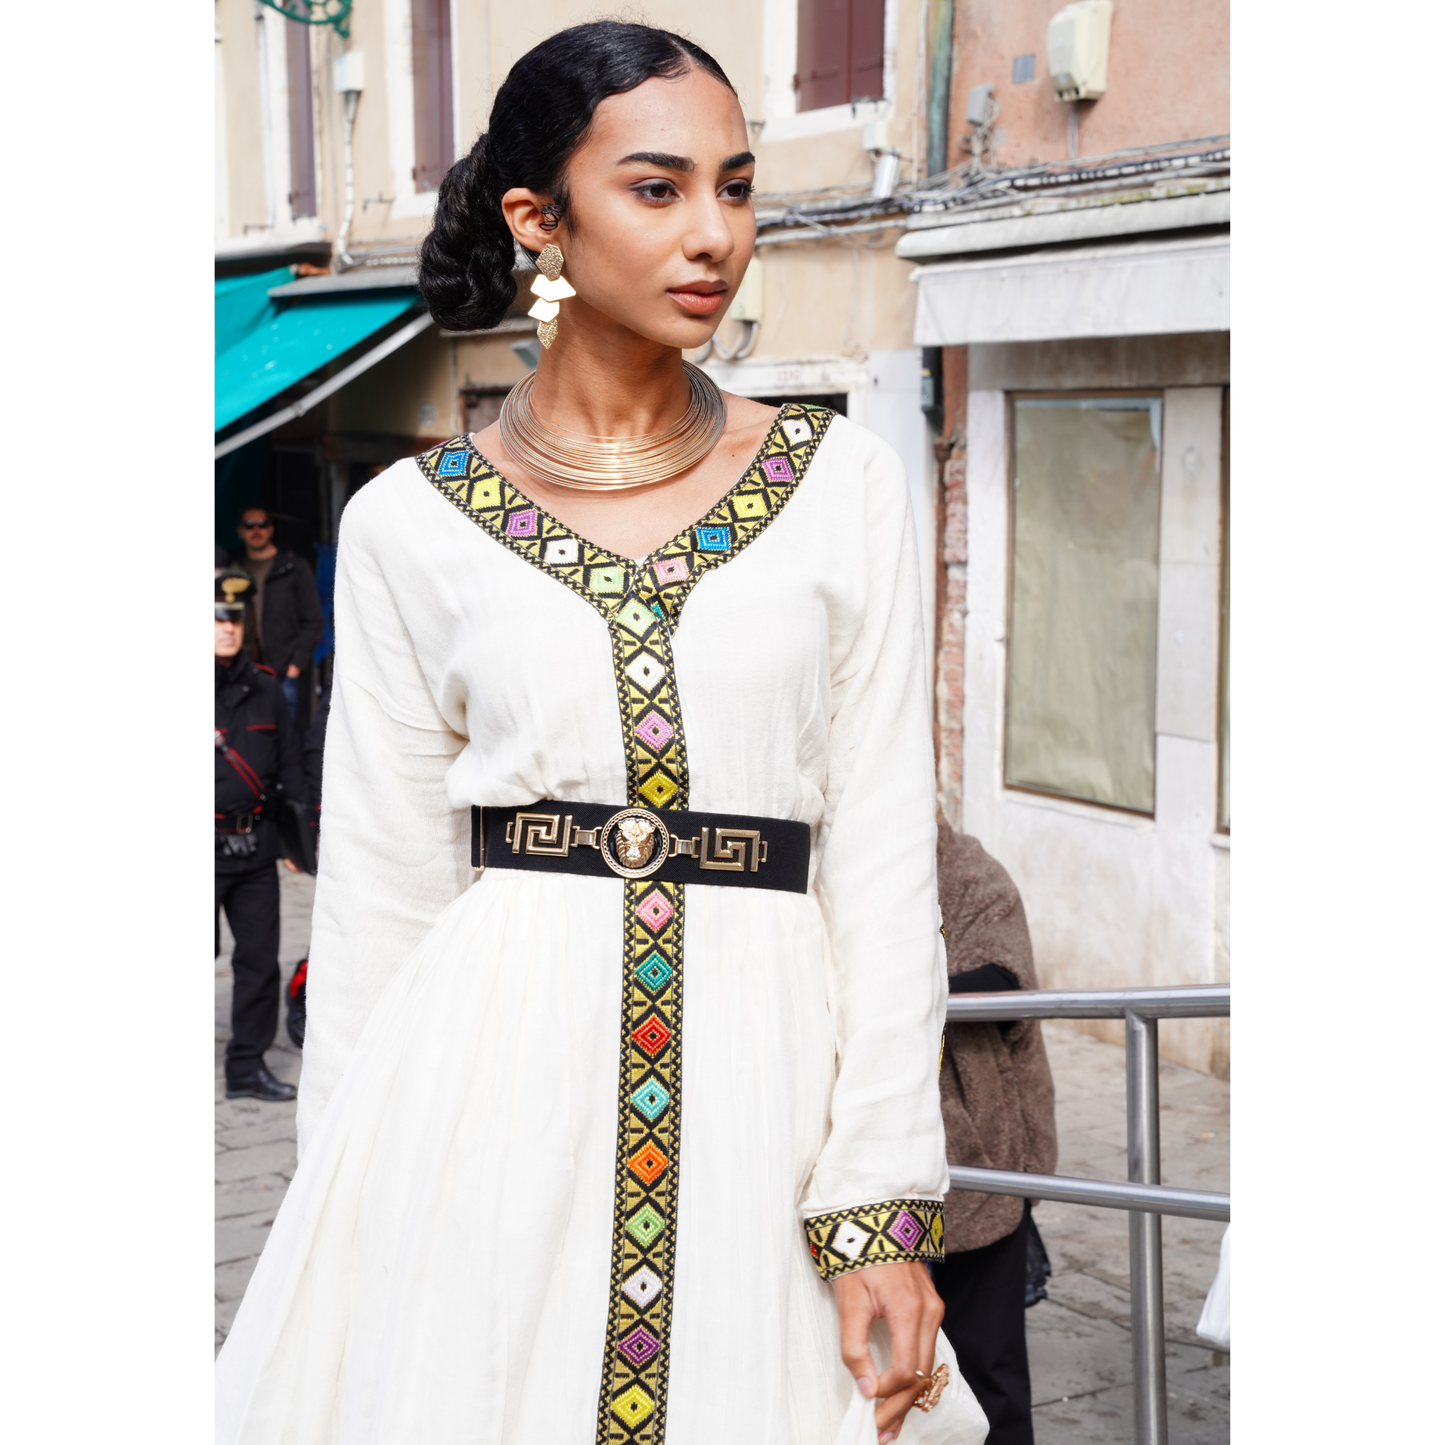 The Nigisiti Dress is a stunning, handwoven and hand-embroidered dress made with 100% Ethiopian cotton. It's flowing, loose design makes it perfect for vacations, holidays, and special occasions. The intricate embroidery is done by hand, making each piece unique and one-of-a-kind. It's a beautiful and comfortable choice for anyone looking to make a statement at their next event or vacation.konjohabeshaAuthentictilif handmadefall2023fashionShamayim